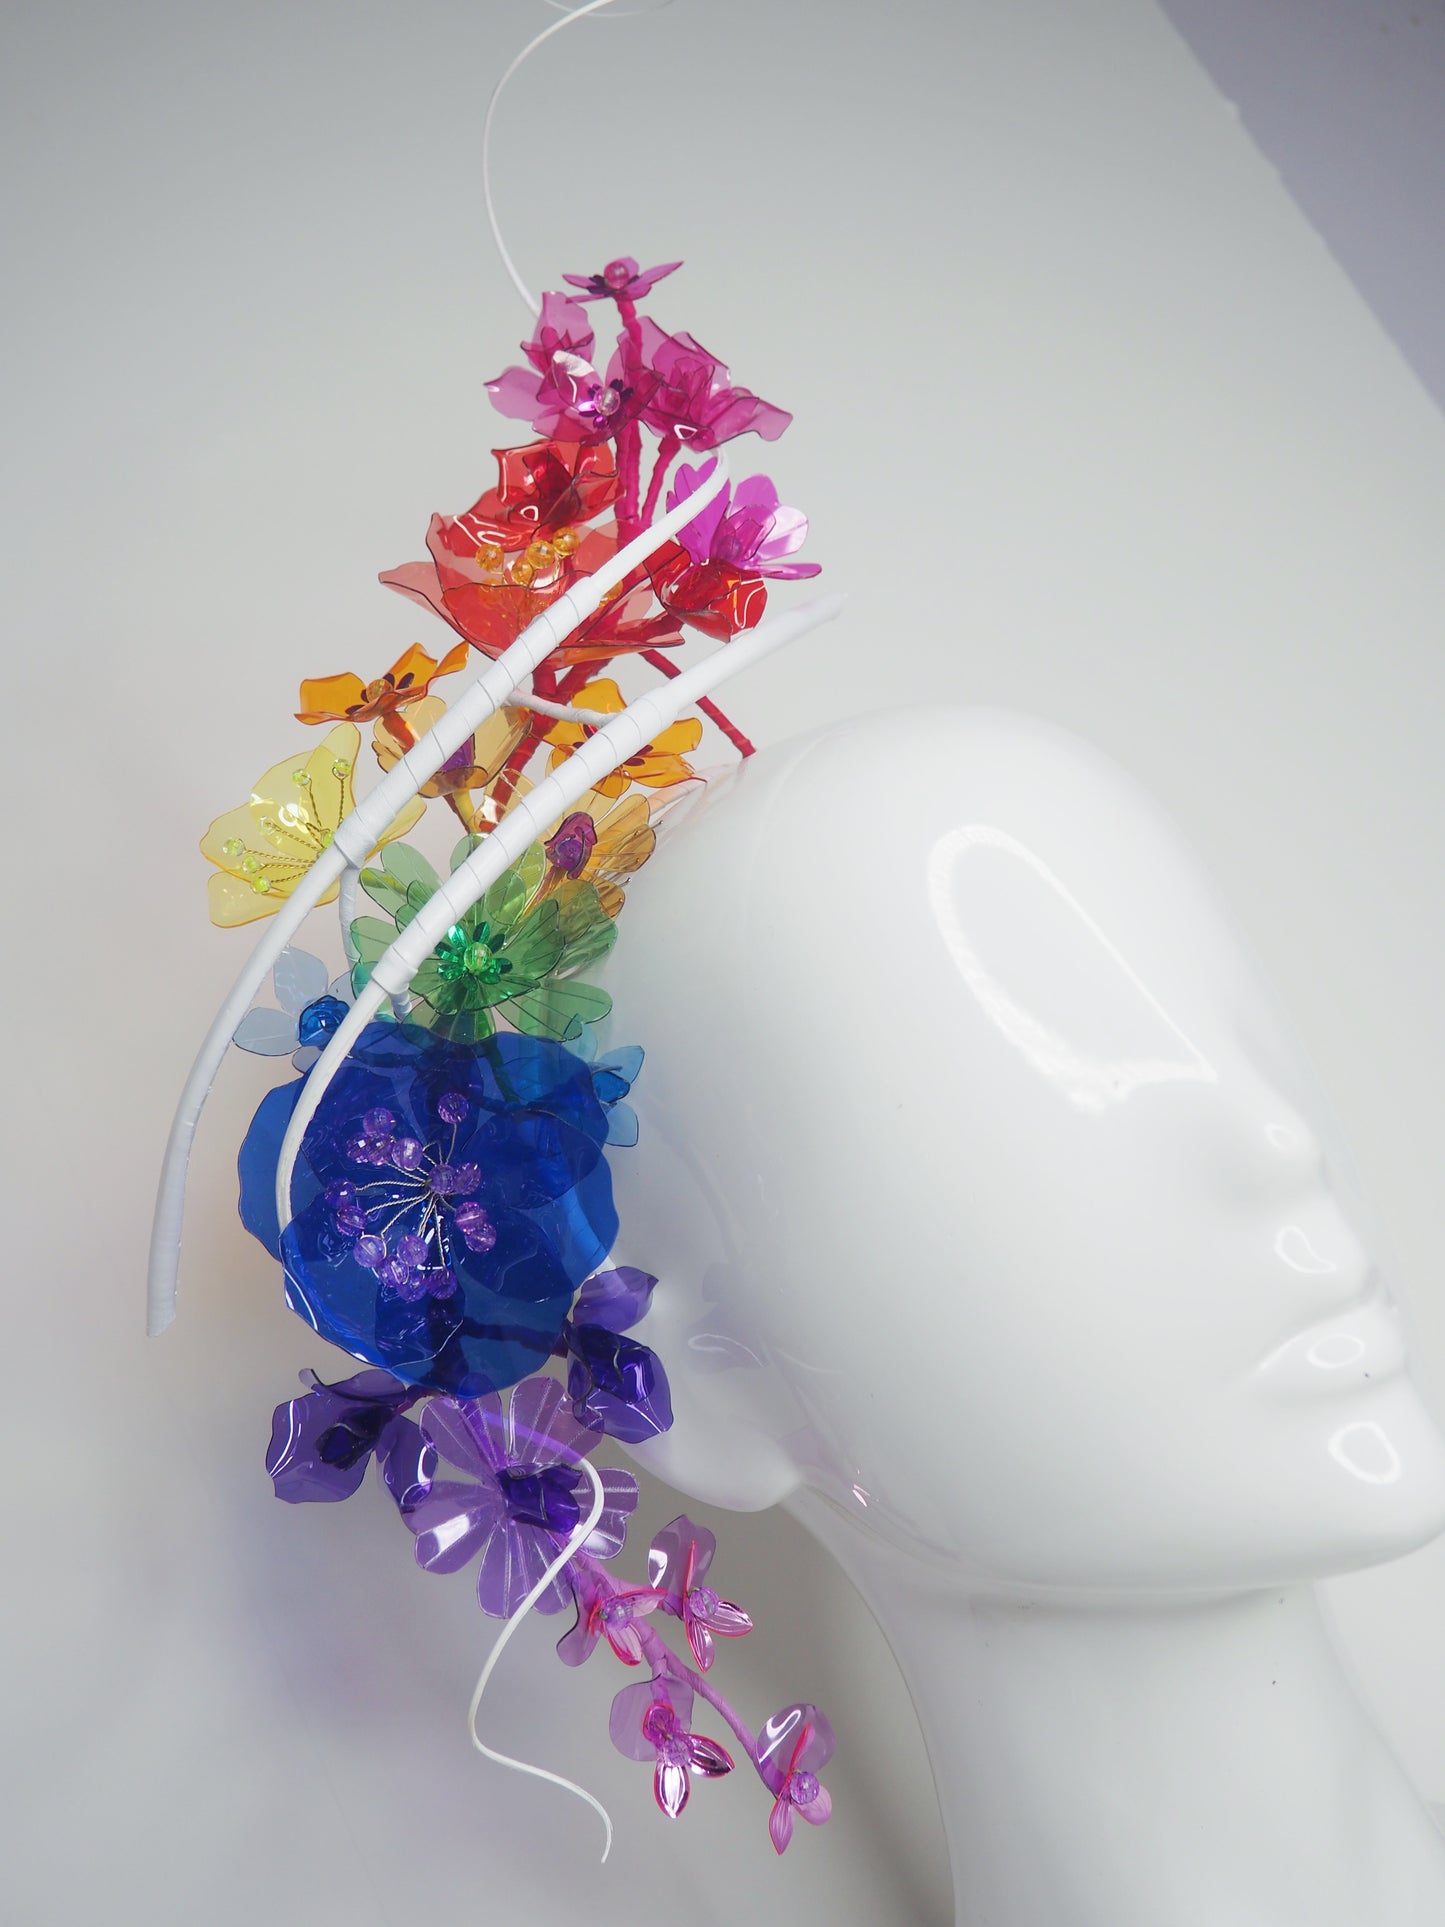 Rainbow Connection - Rainbow crystoform headband with White quills